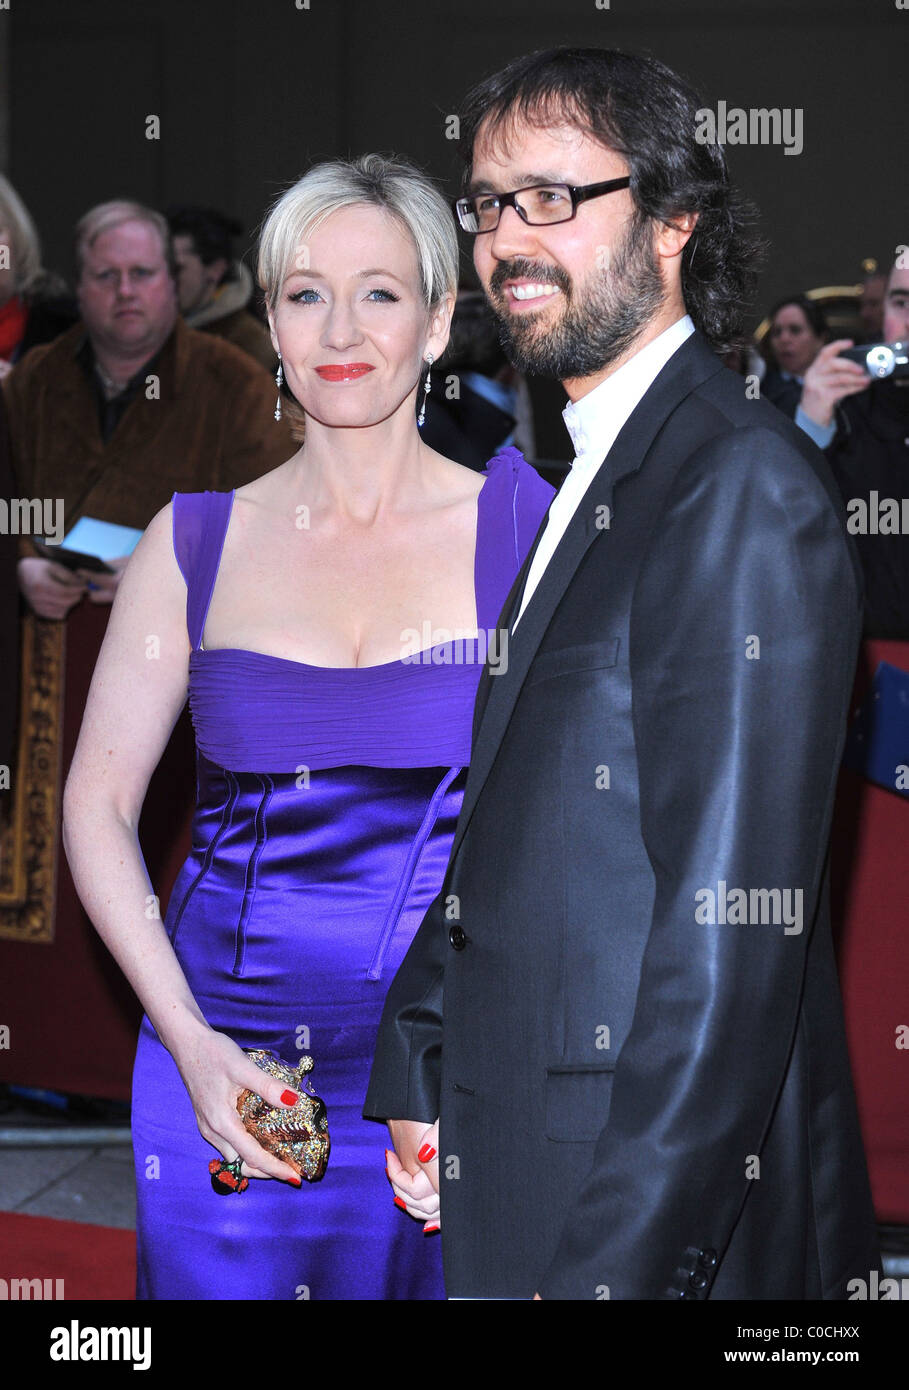 J K. Rowling and husband Neil Murray Galaxy British Book Awards held at the Grosvenor House - Arrivals London, England - Stock Photo